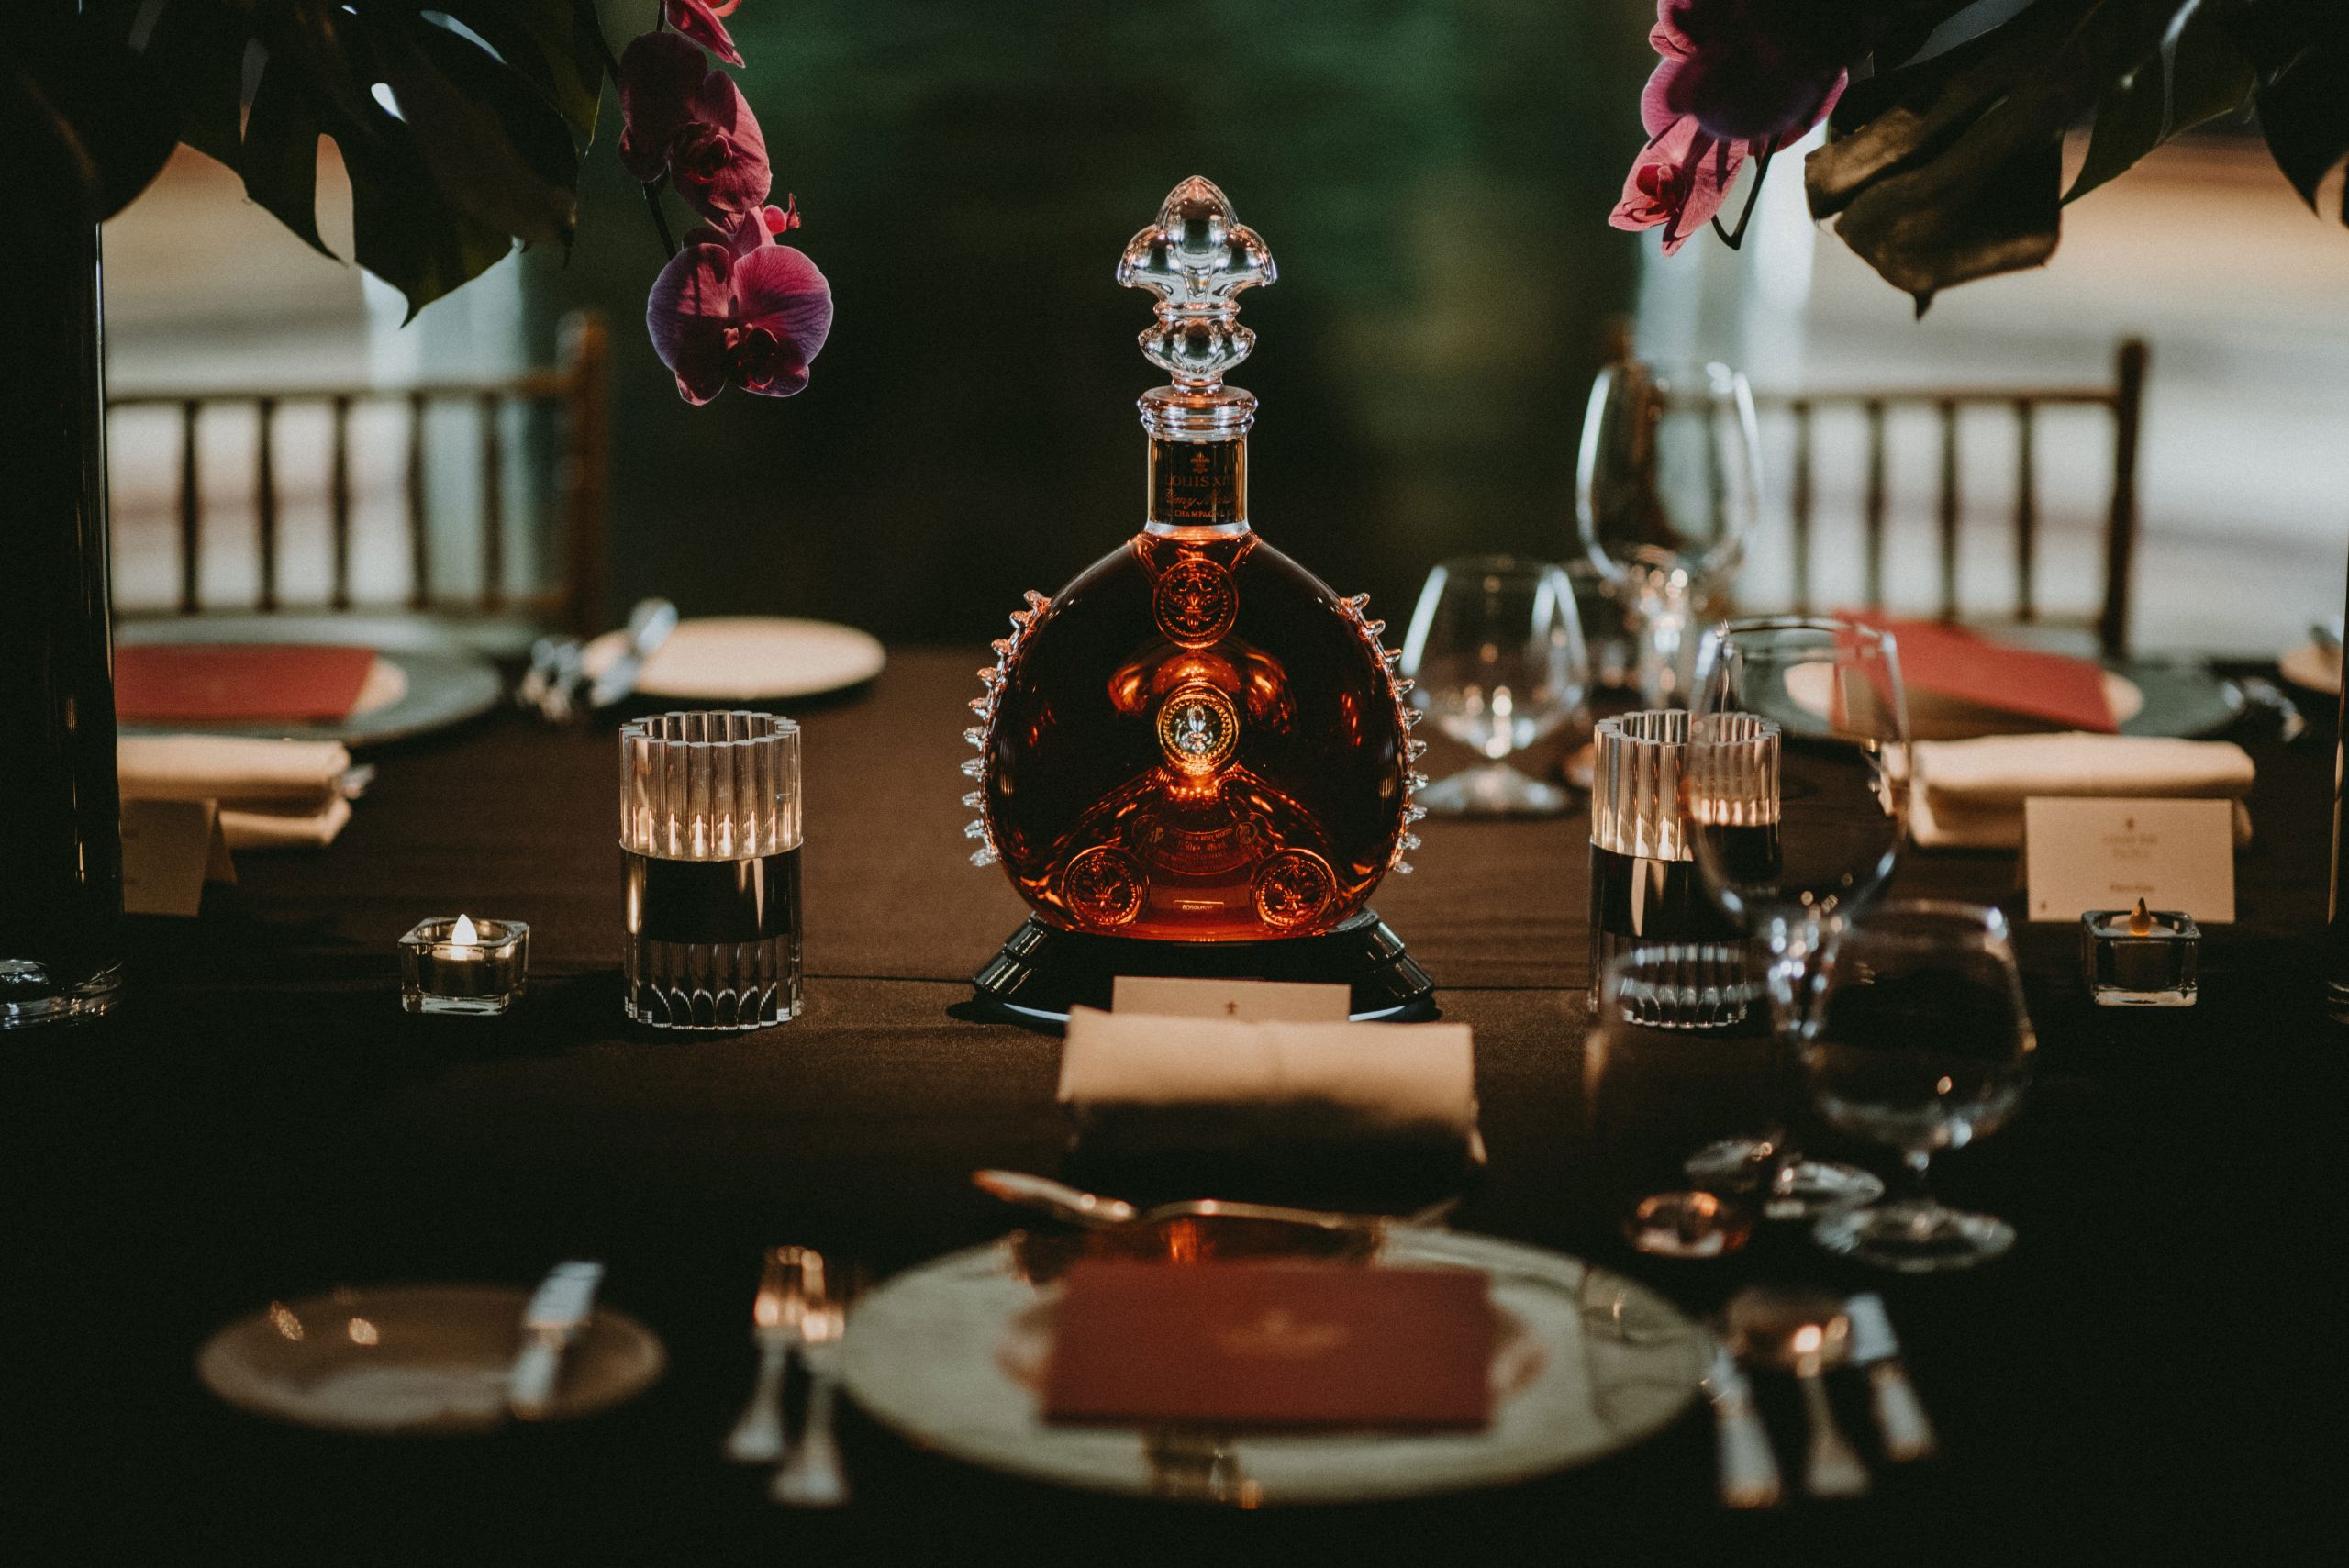 How to appreciate the RM27,000 Louis XIII cognac according to a Cellar  Master